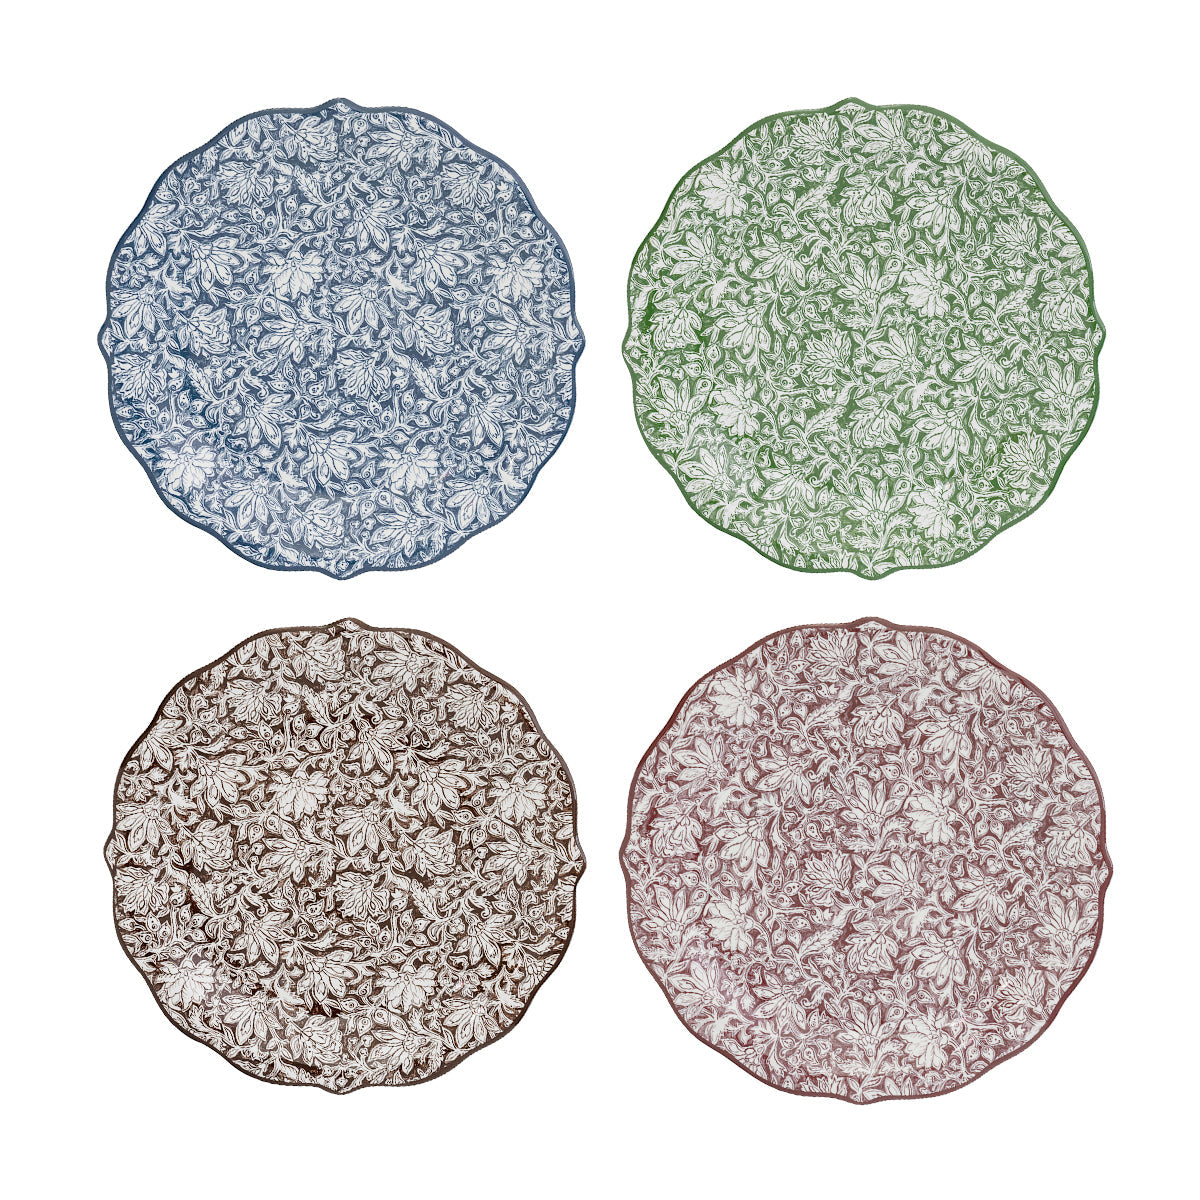 This set of four scalloped party plates, each featuring an allover floral motif in a unique hue, make a chic statement when layered into alternating place settings or stacked on a buffet table for cocktail bites. Packaged in a gift box, this set would make a great gift for a generous hostess or to bestow upon a Bohemian style-inclined friend's birthday.